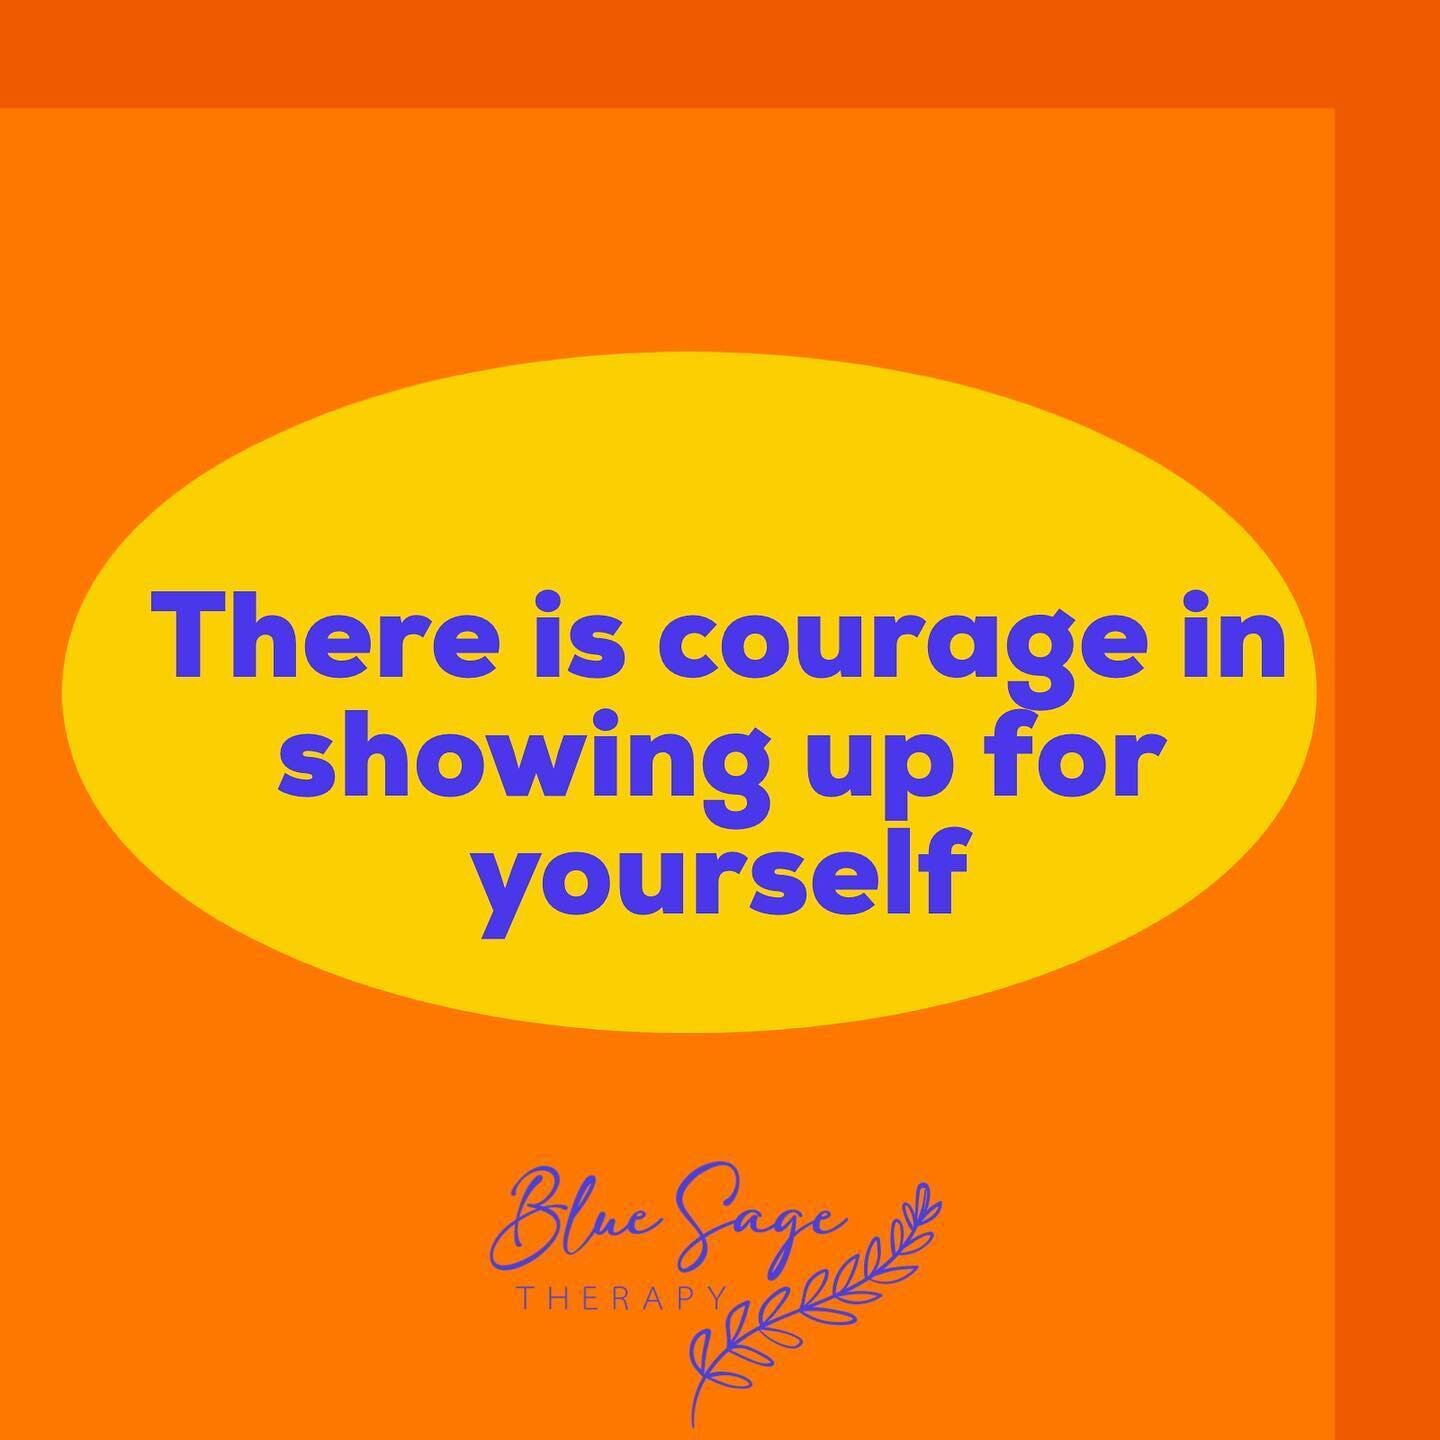 There is so much courage in showing up for ourselves every day
🌱
This can be as big as reinforcing boundaries or as small as listening to our bodies and saying no when we&rsquo;ve spread ourselves too thin
🌱
Keep showing up for yourself, no act is 